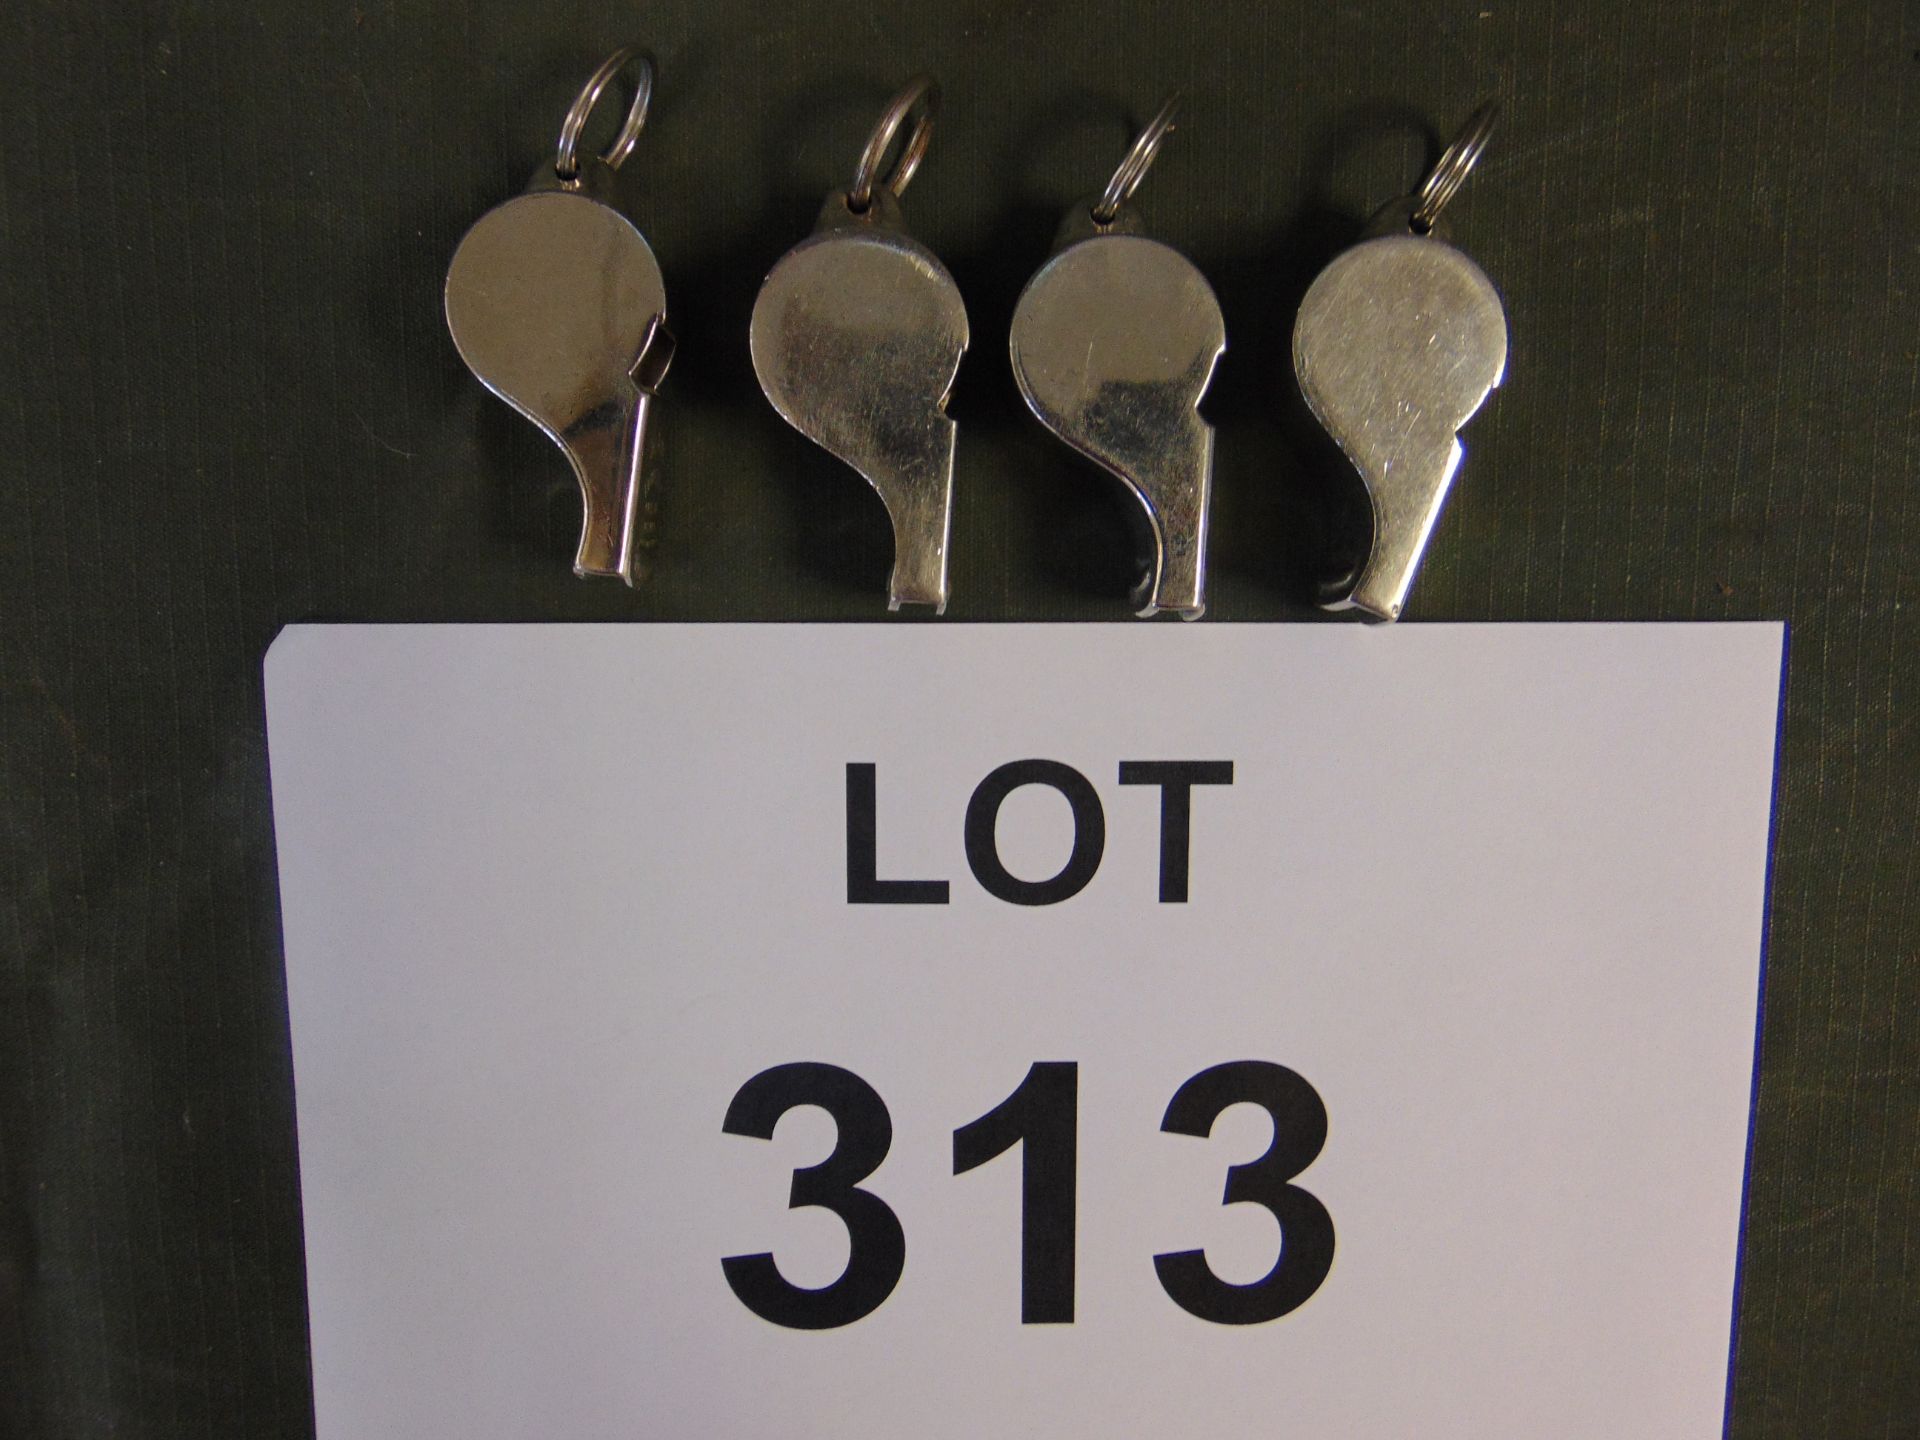 4X ACME THUNDERER SERVICE WHISTLES BROAD ARROW MARKED - Image 10 of 10